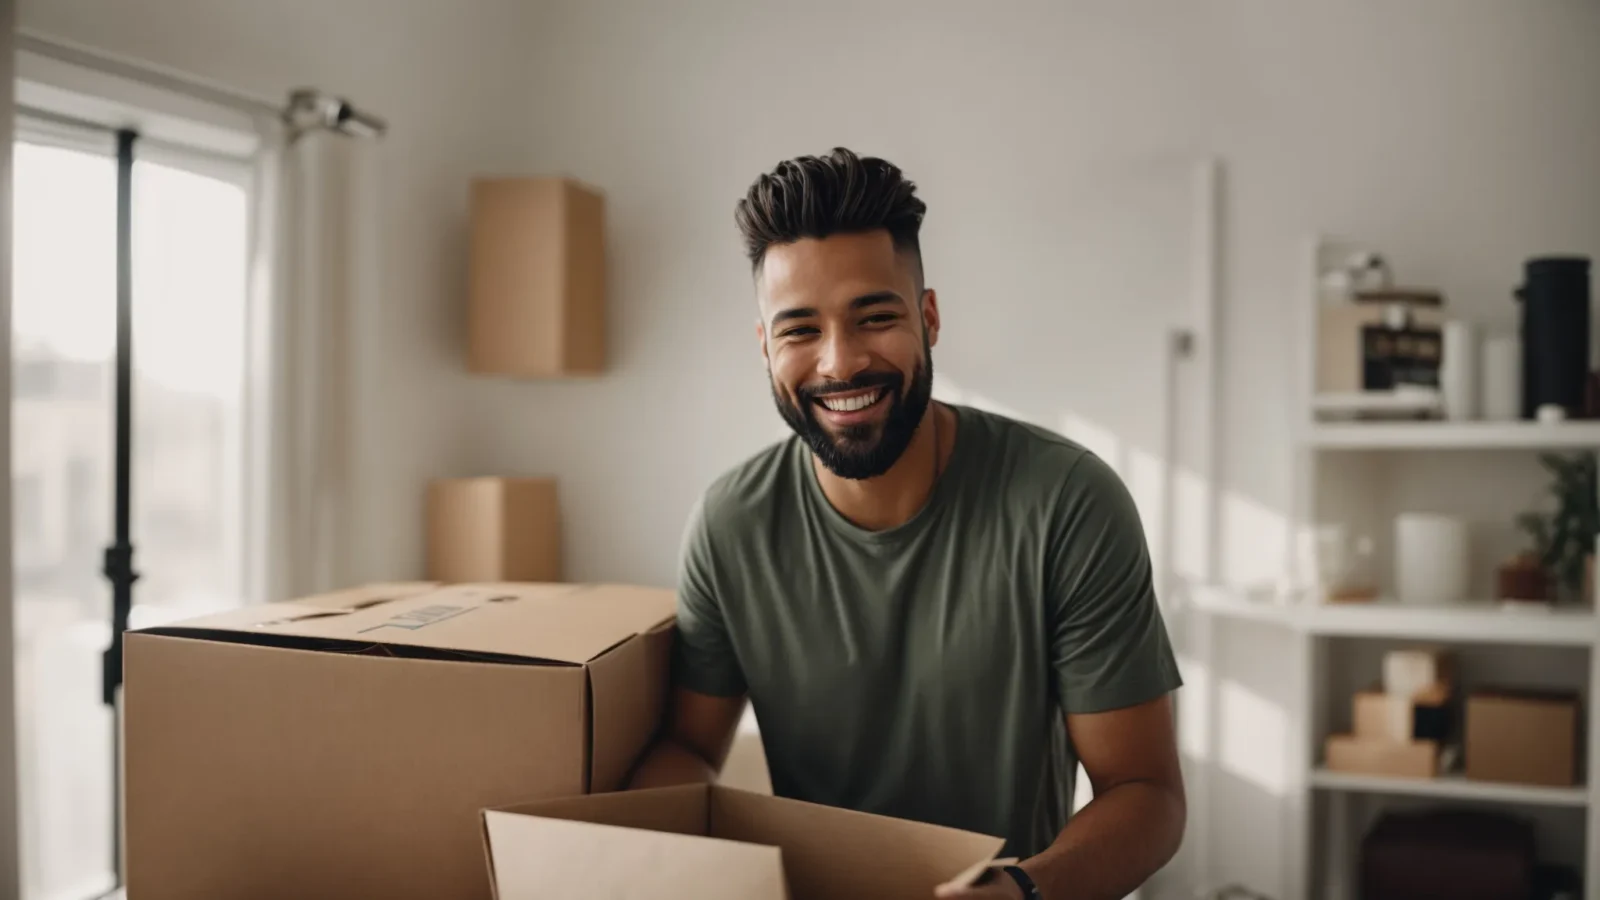 an influencer smiling at the camera while unboxing a product in a well-lit room.